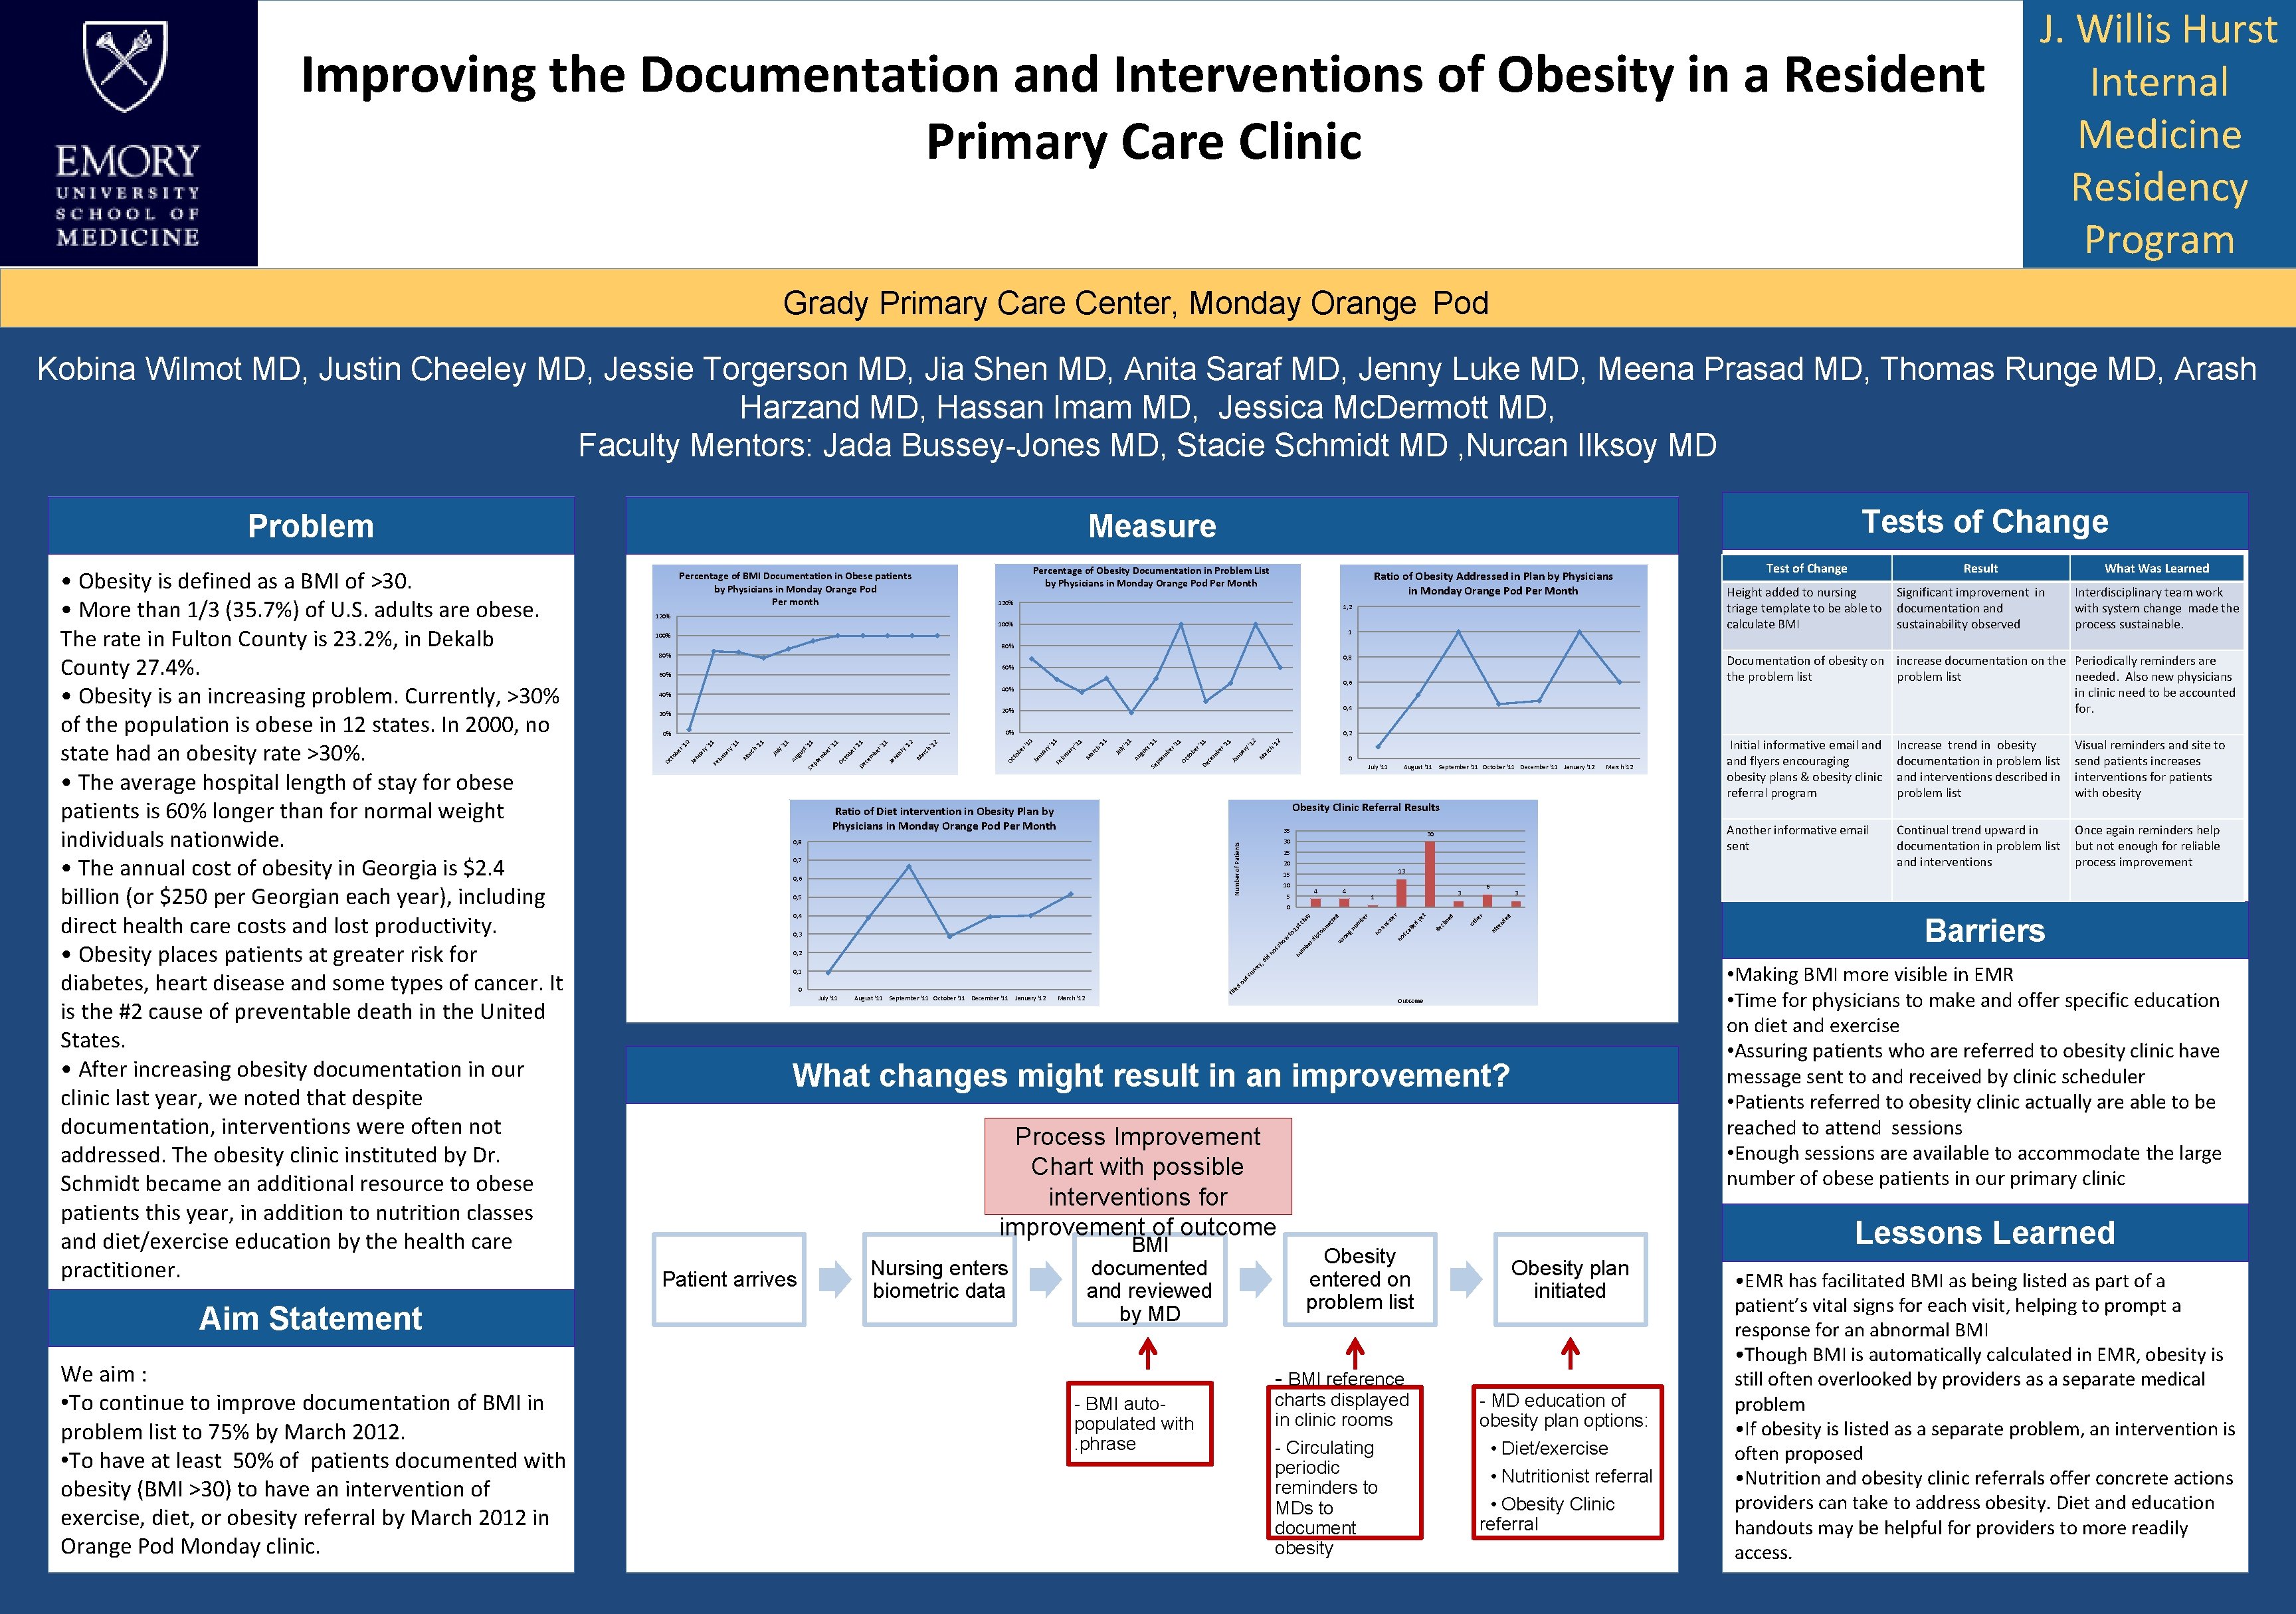 Improving the Documentation and Interventions of Obesity in a Resident Primary Care Clinic J.